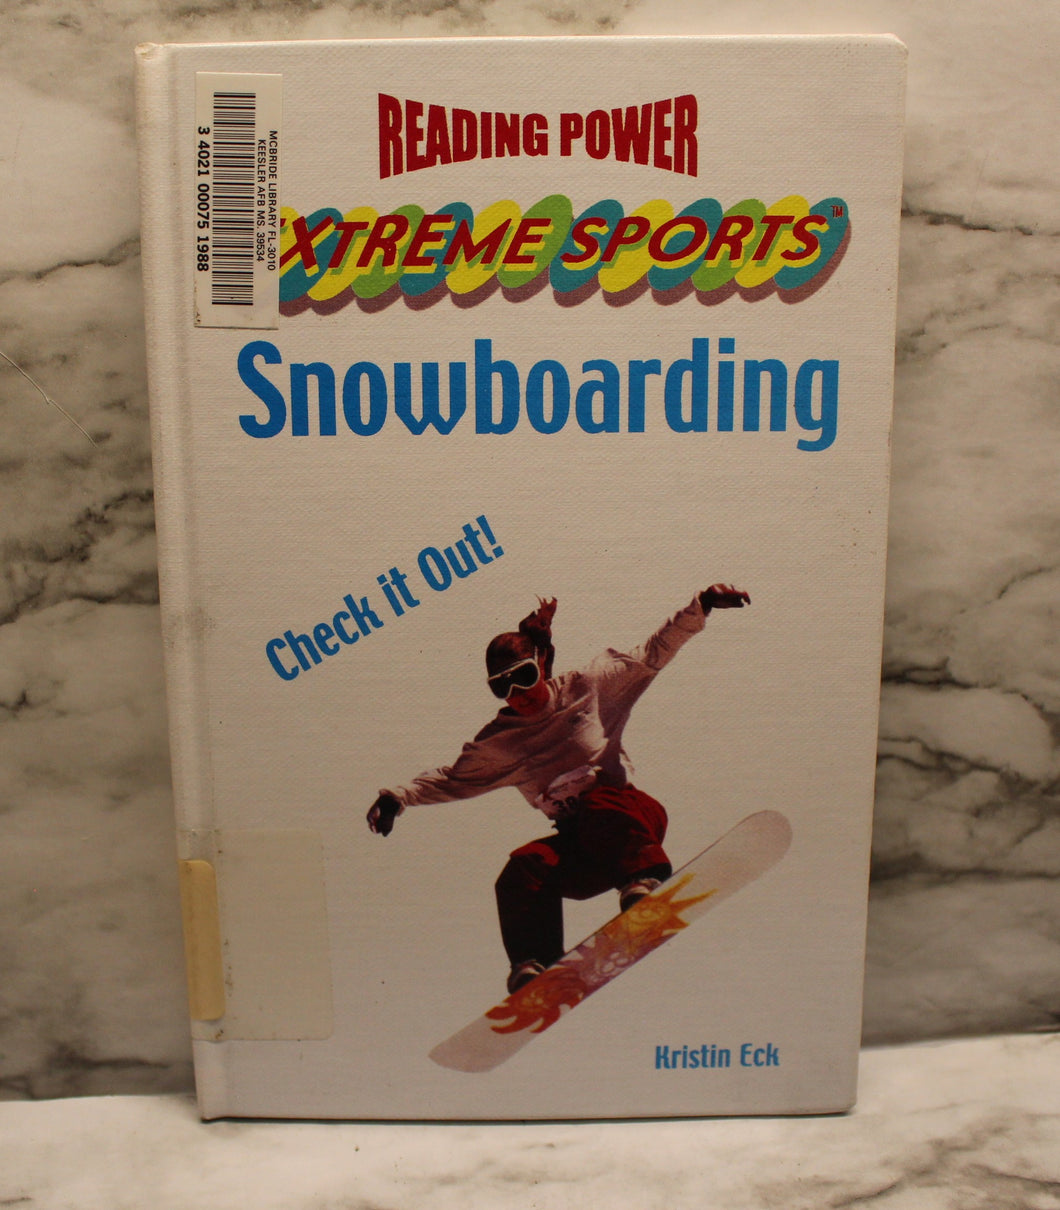 Snowboarding Check It Out! - By Kristin Eck - Used